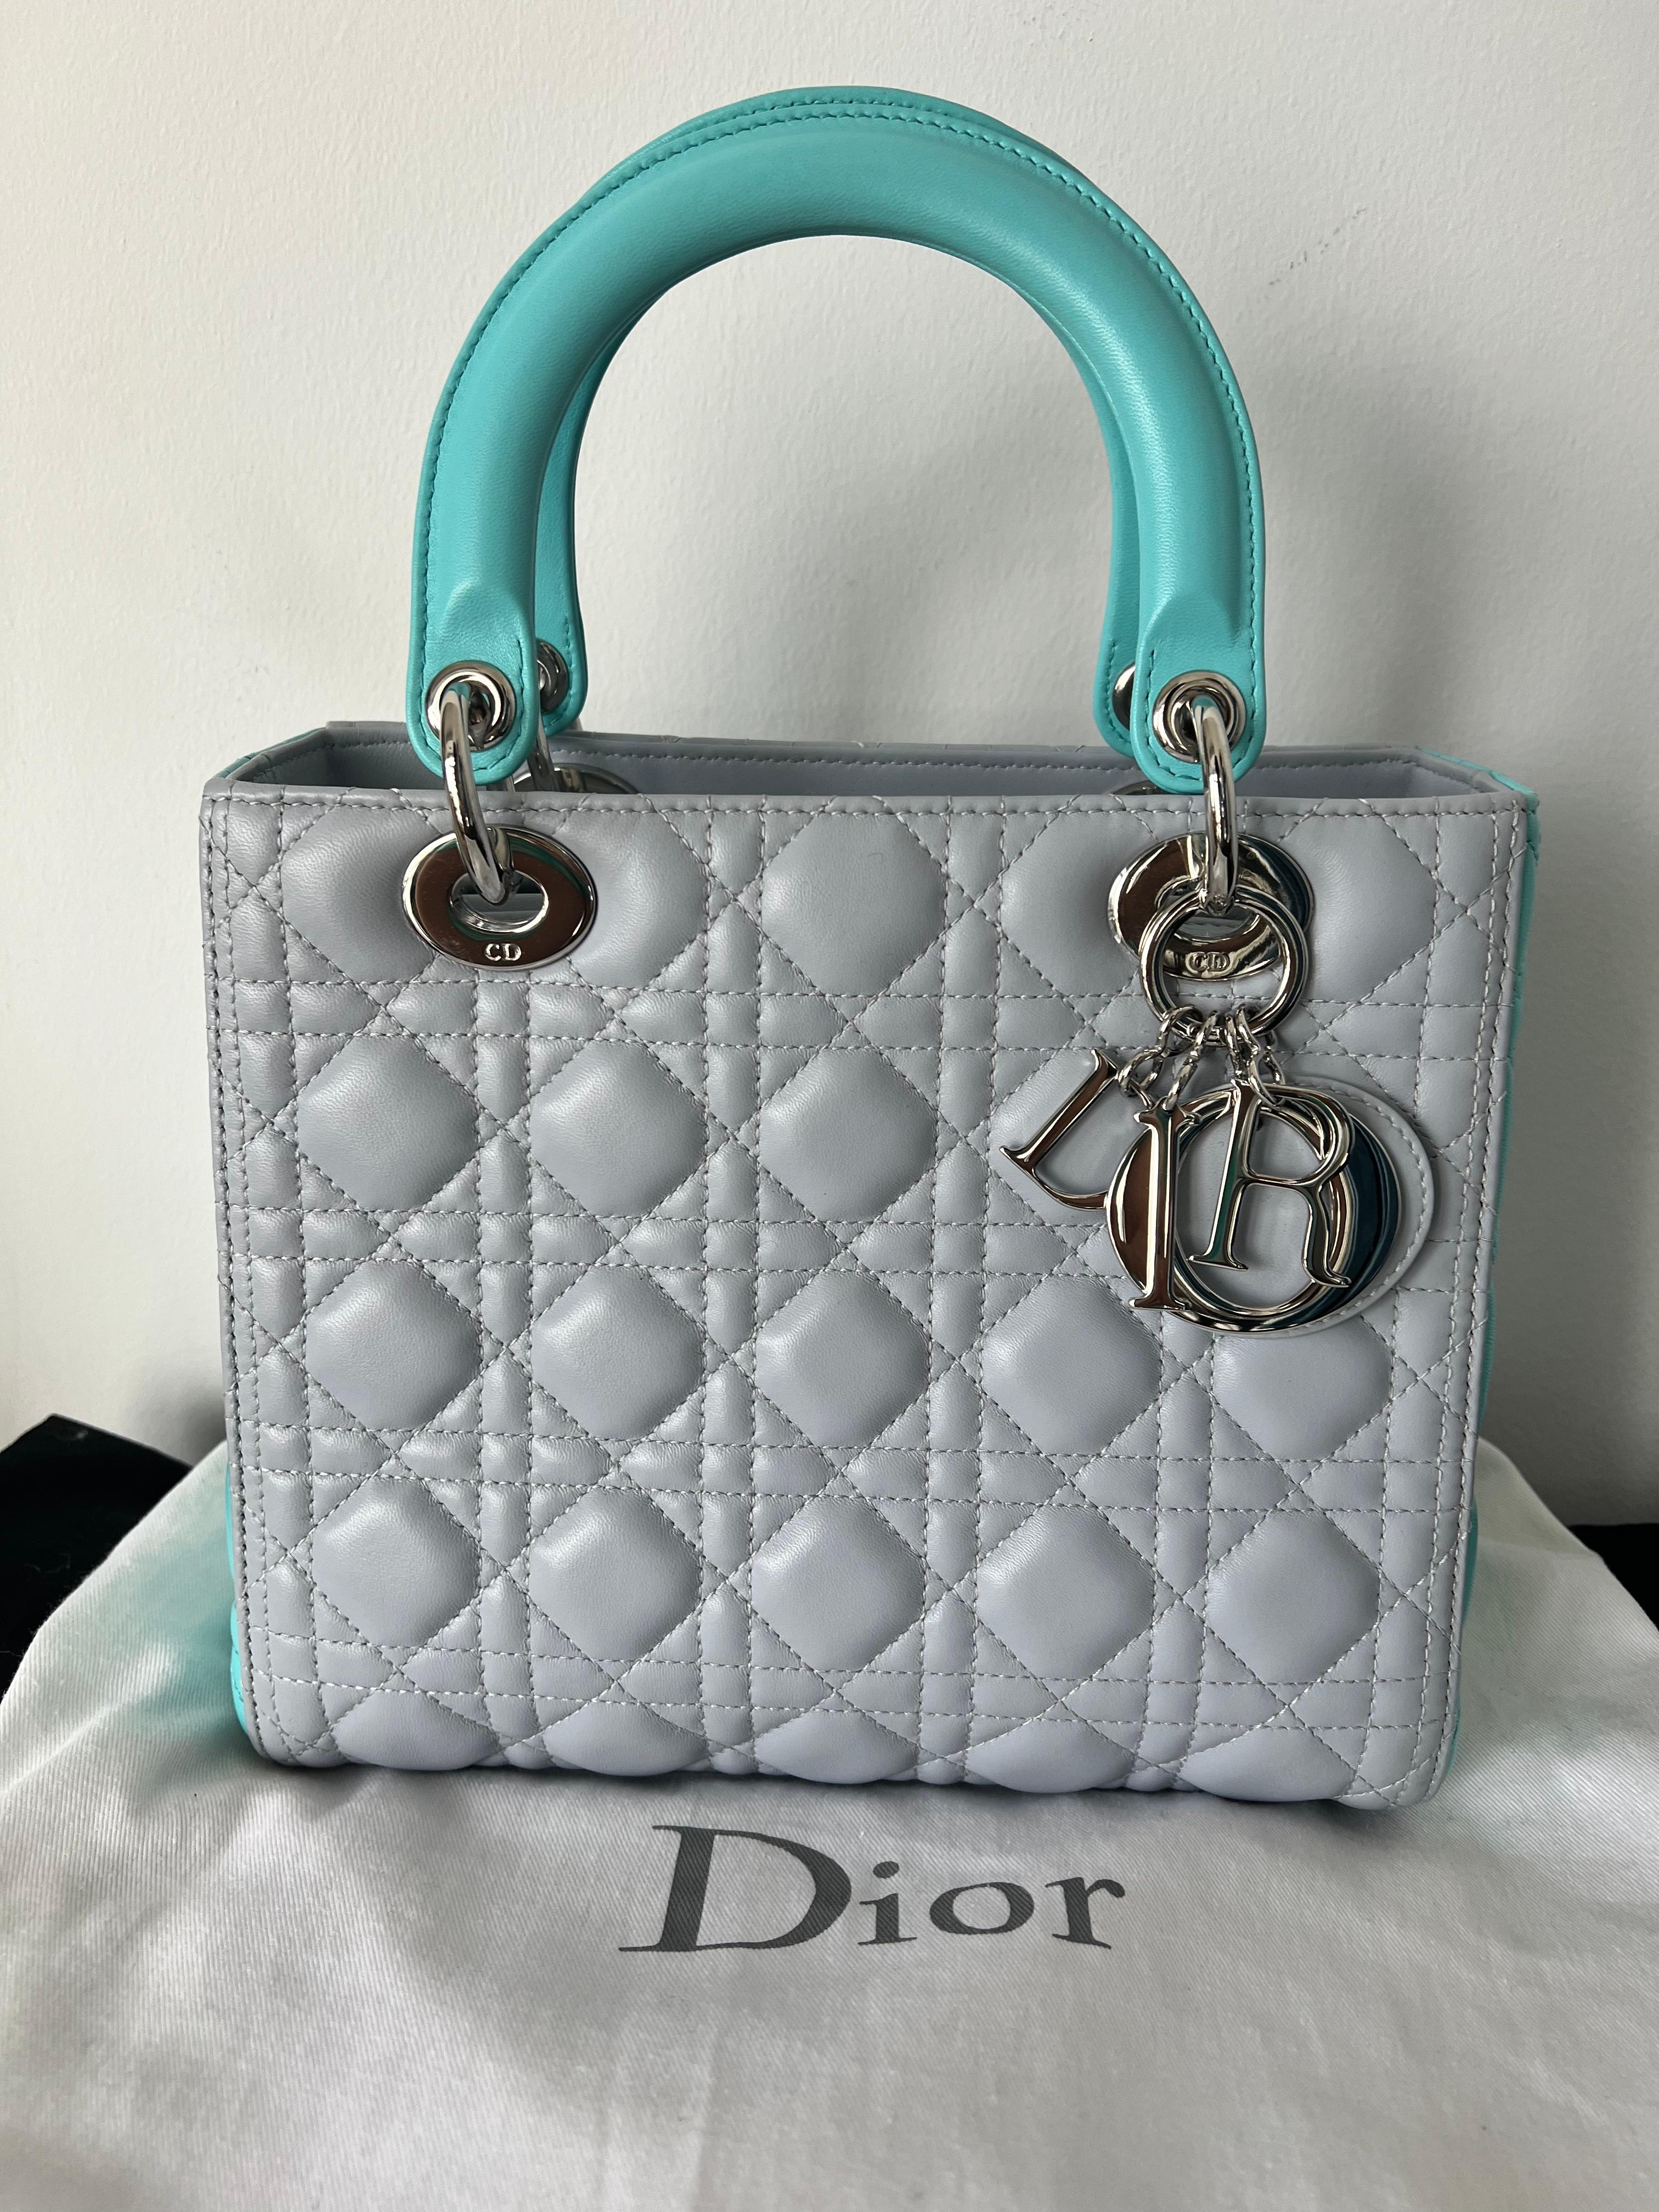 Introducing the Christian Dior Light Grey and Tiffany Blue Two-Tone Lady Dior Lamb Skin Bag: A Timeless Icon of Elegance and Luxury.

Elevate your style to new heights with the Christian Dior Light Grey and Tiffany Blue Two-Tone Lady Dior Lamb Skin